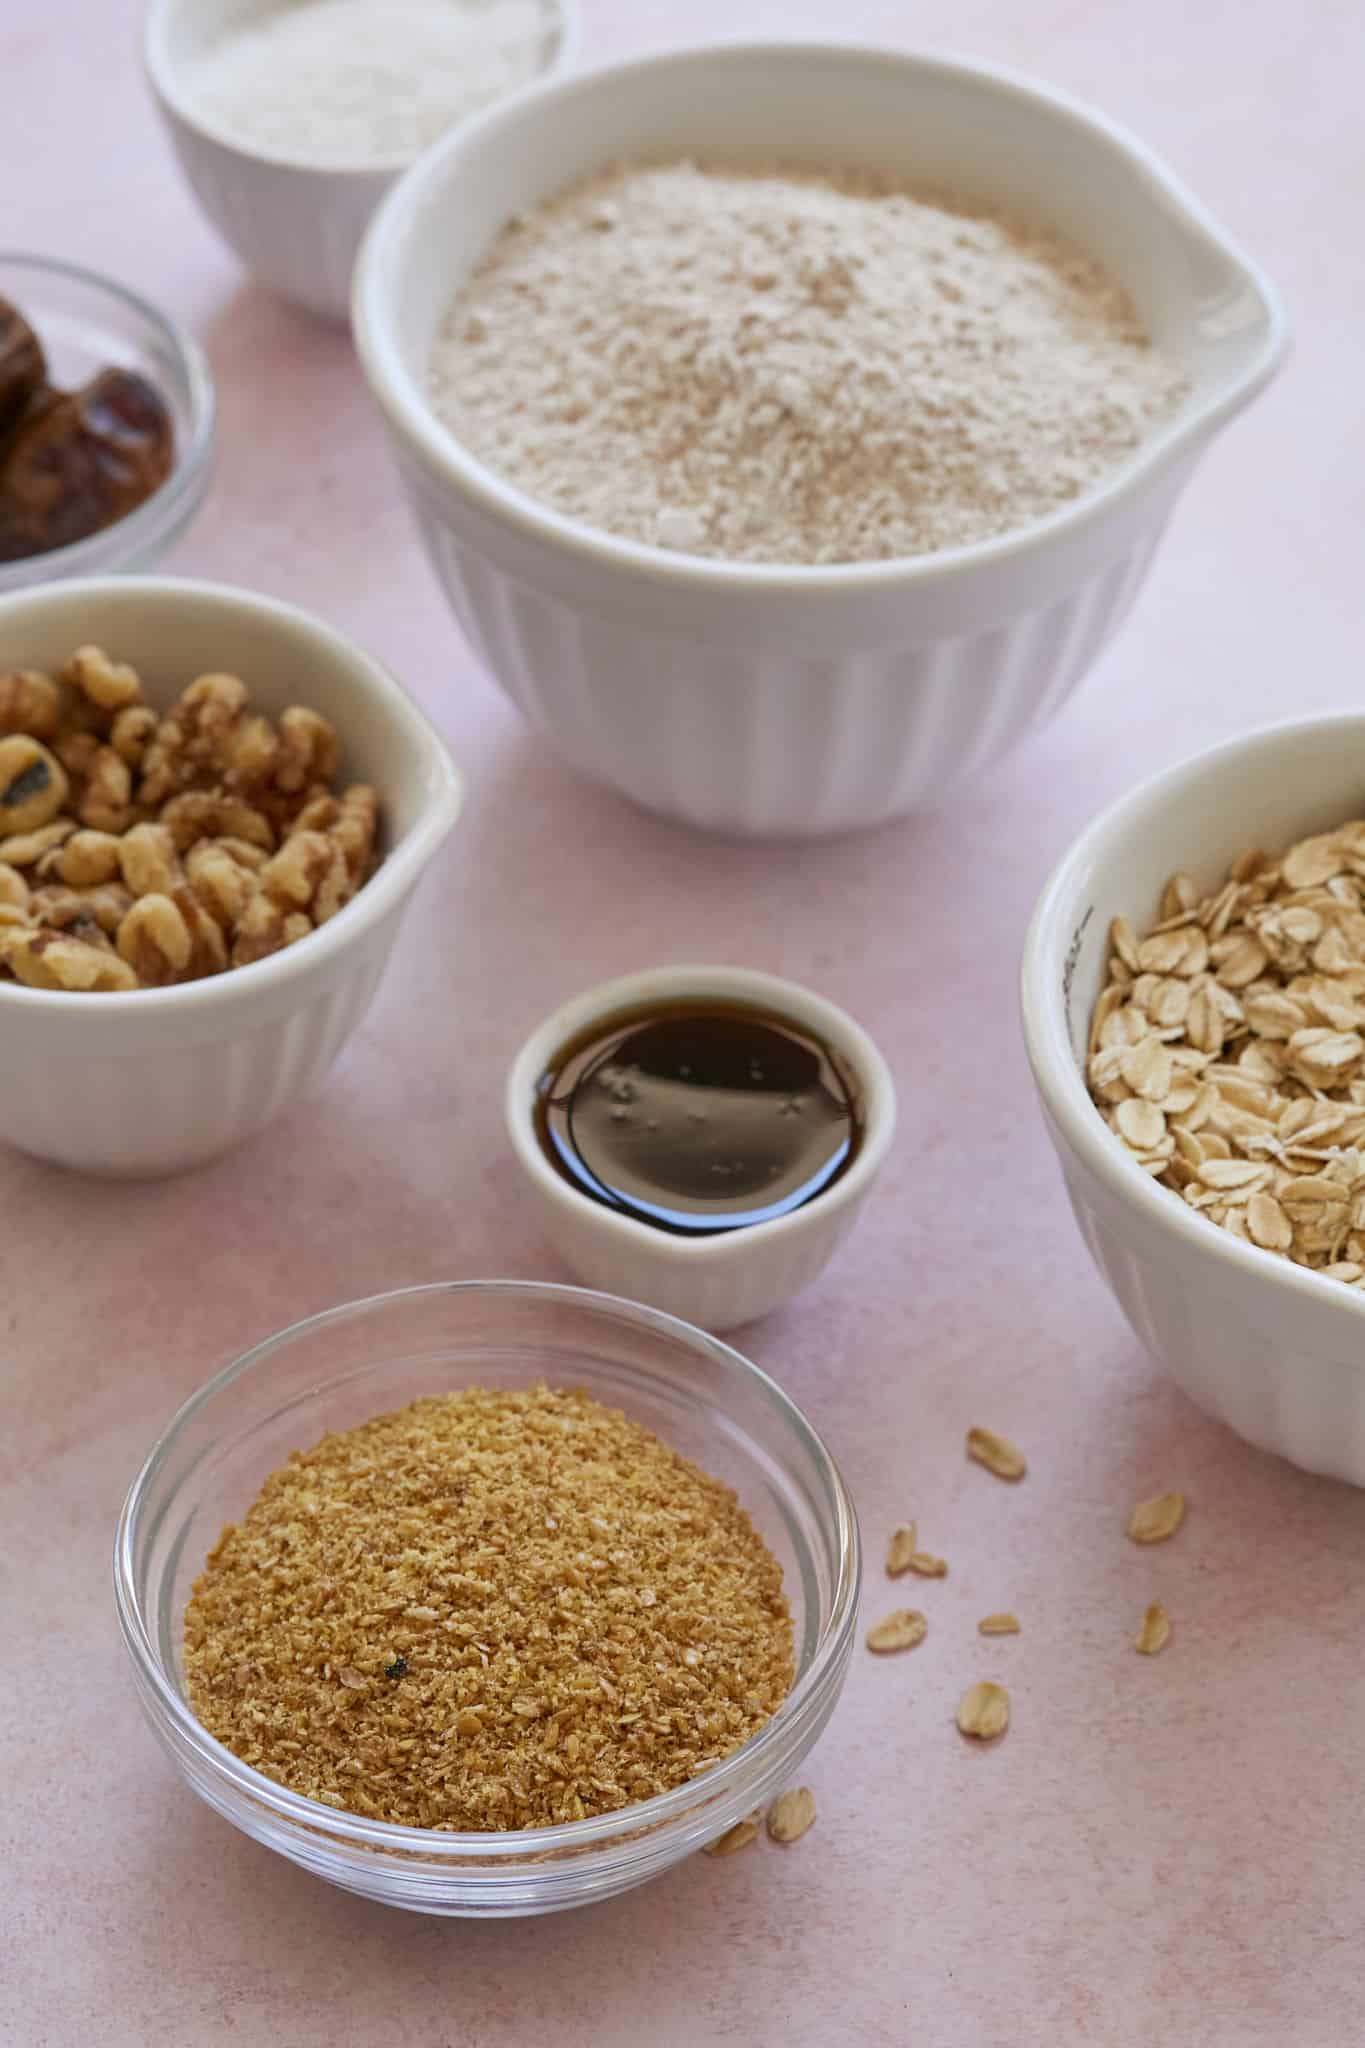 Healthy baking ingredients are displayed on a table, including maple syrup, nuts, oats, and dates.